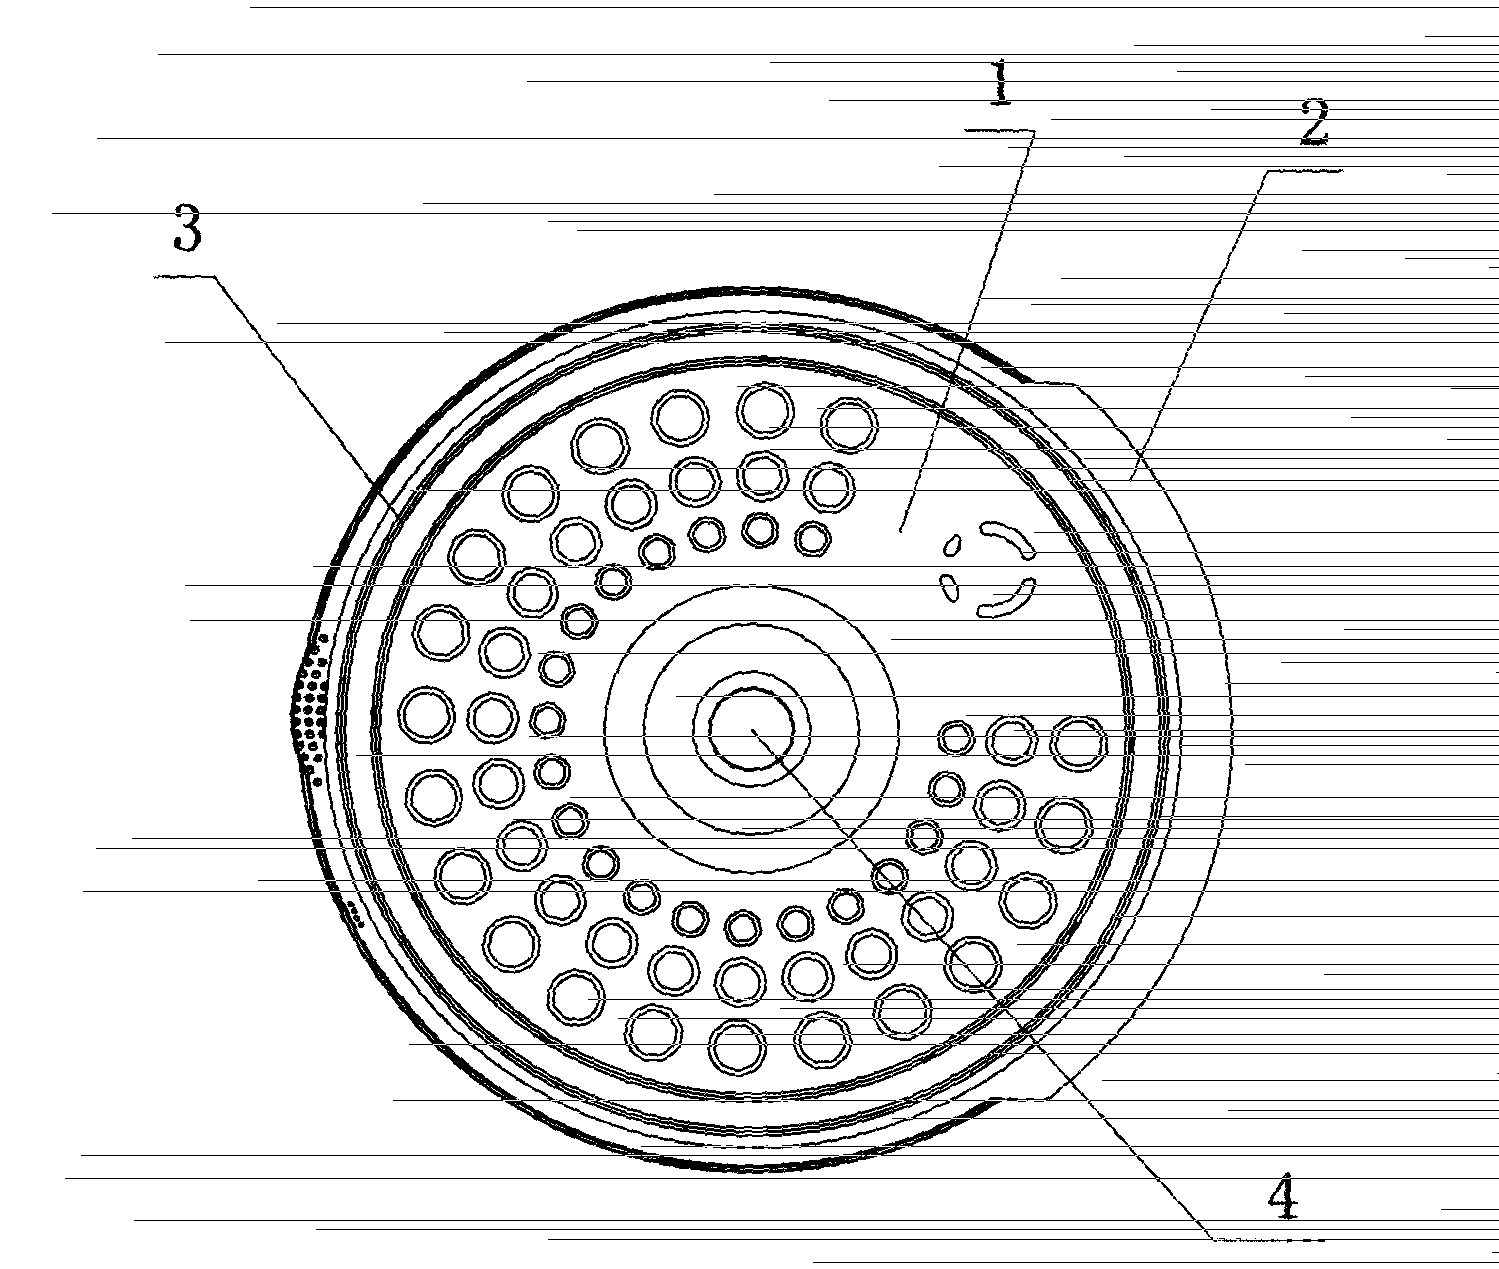 Rice cover sealing plate device capable of being rapidly detached